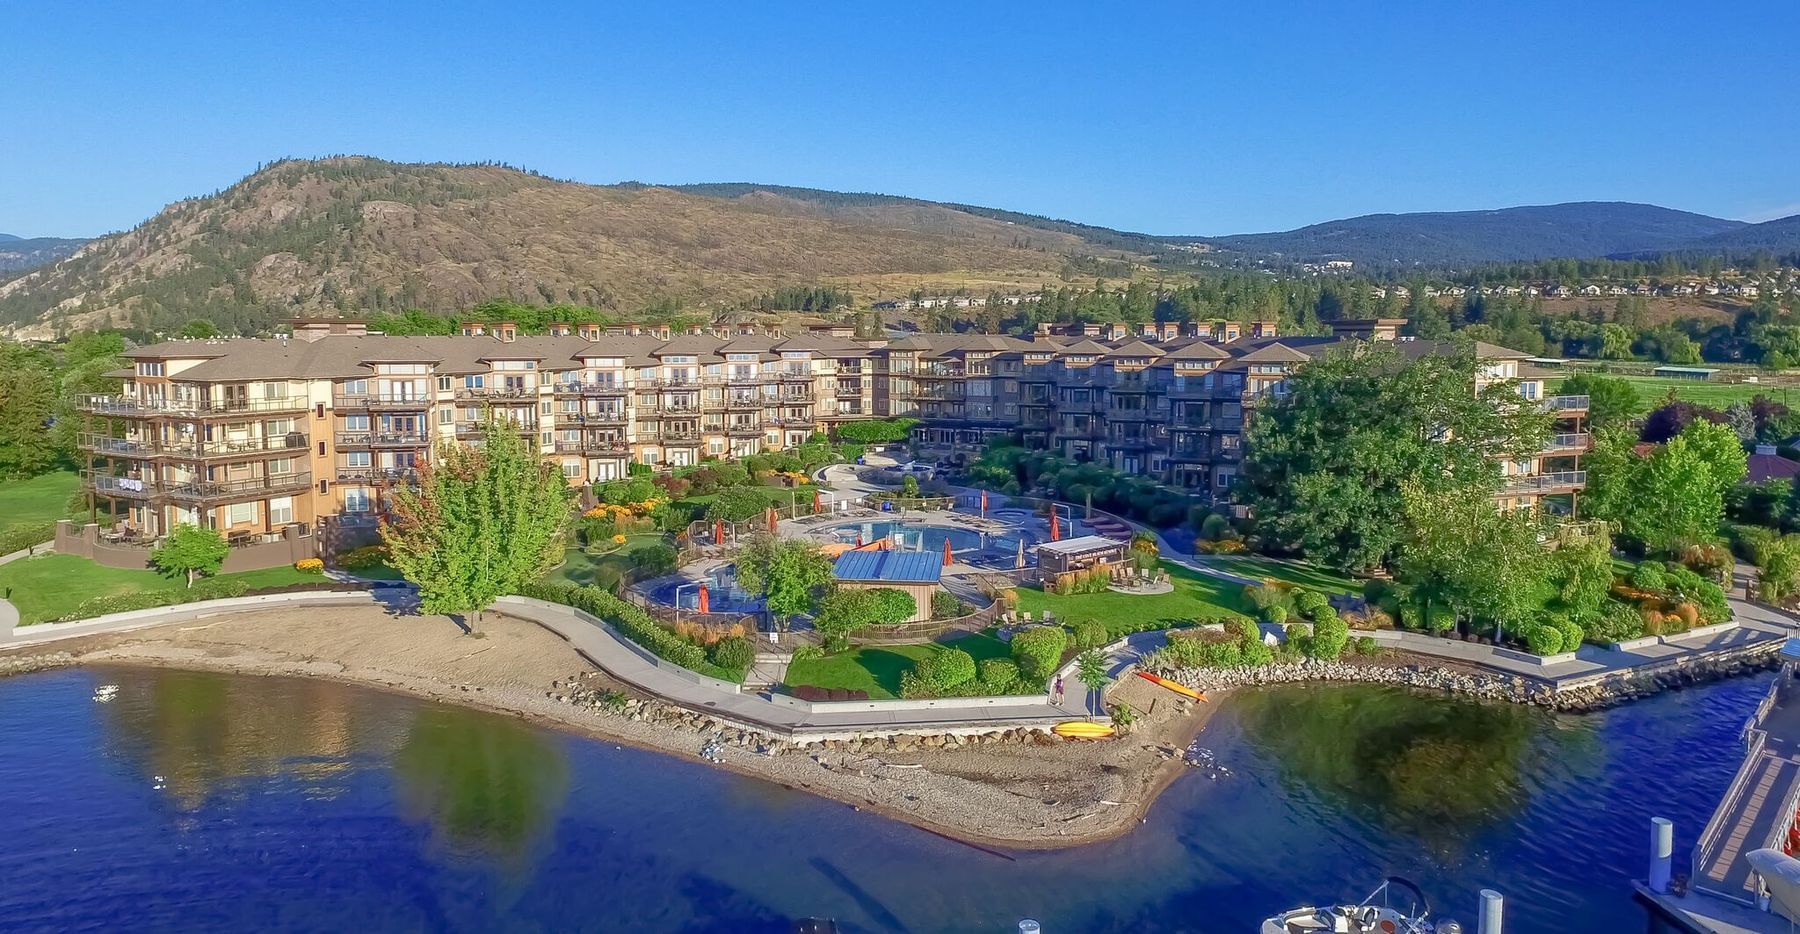 Contact Our Kelowna Bc Hotel The Cove Lakeside Resort